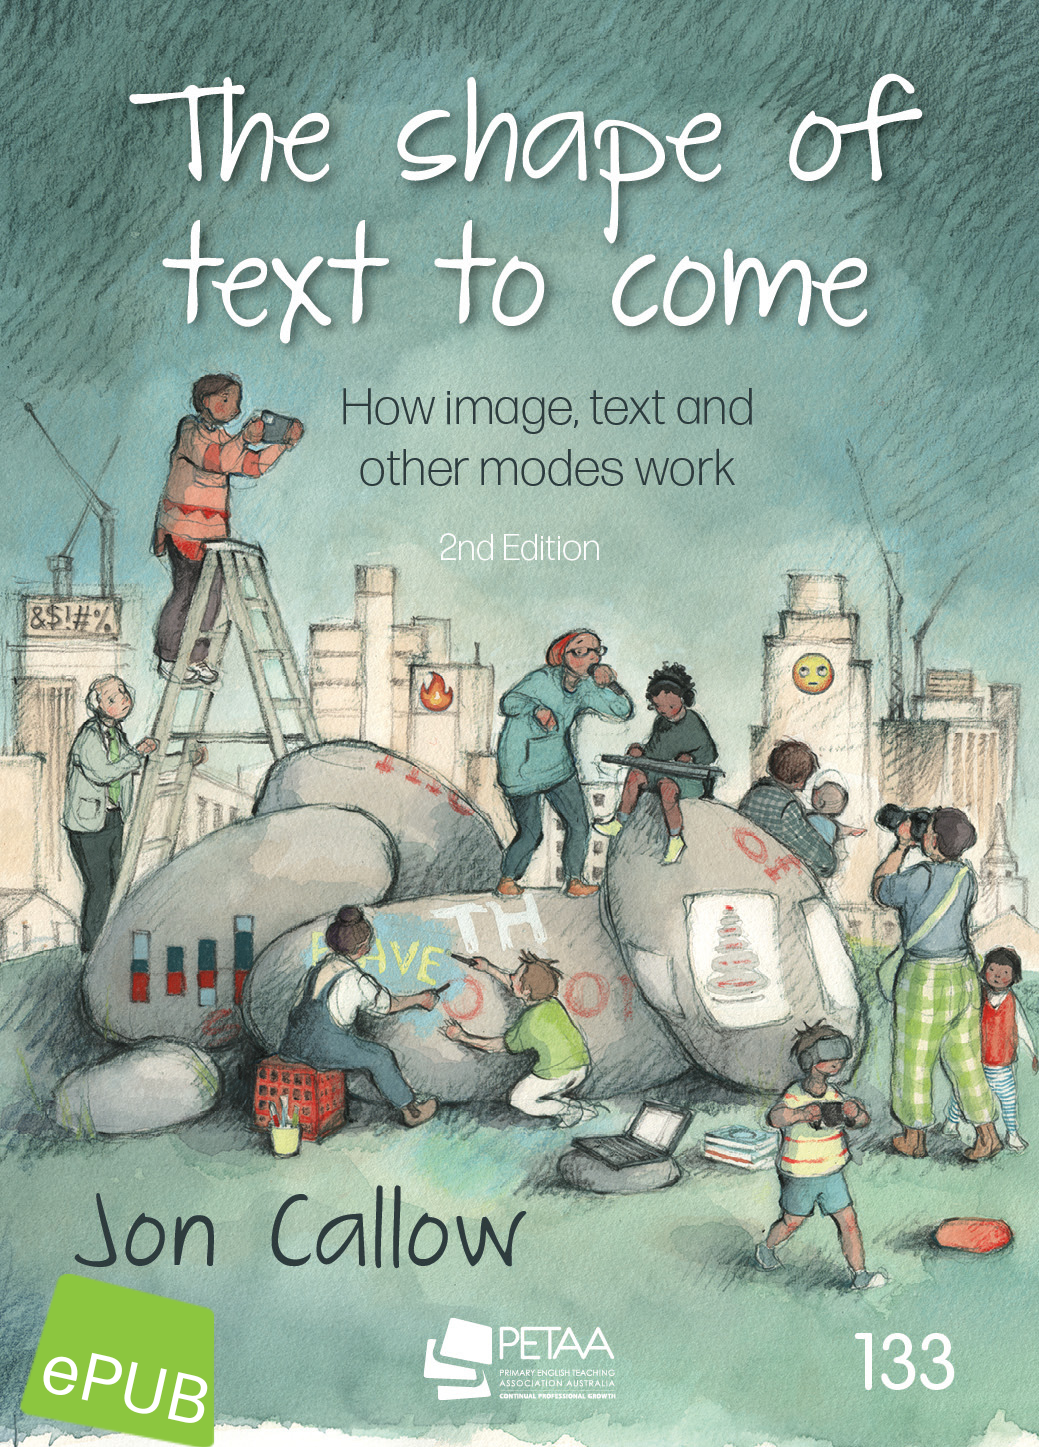 eBook - The shape of text to come 2nd edition - PREORDER